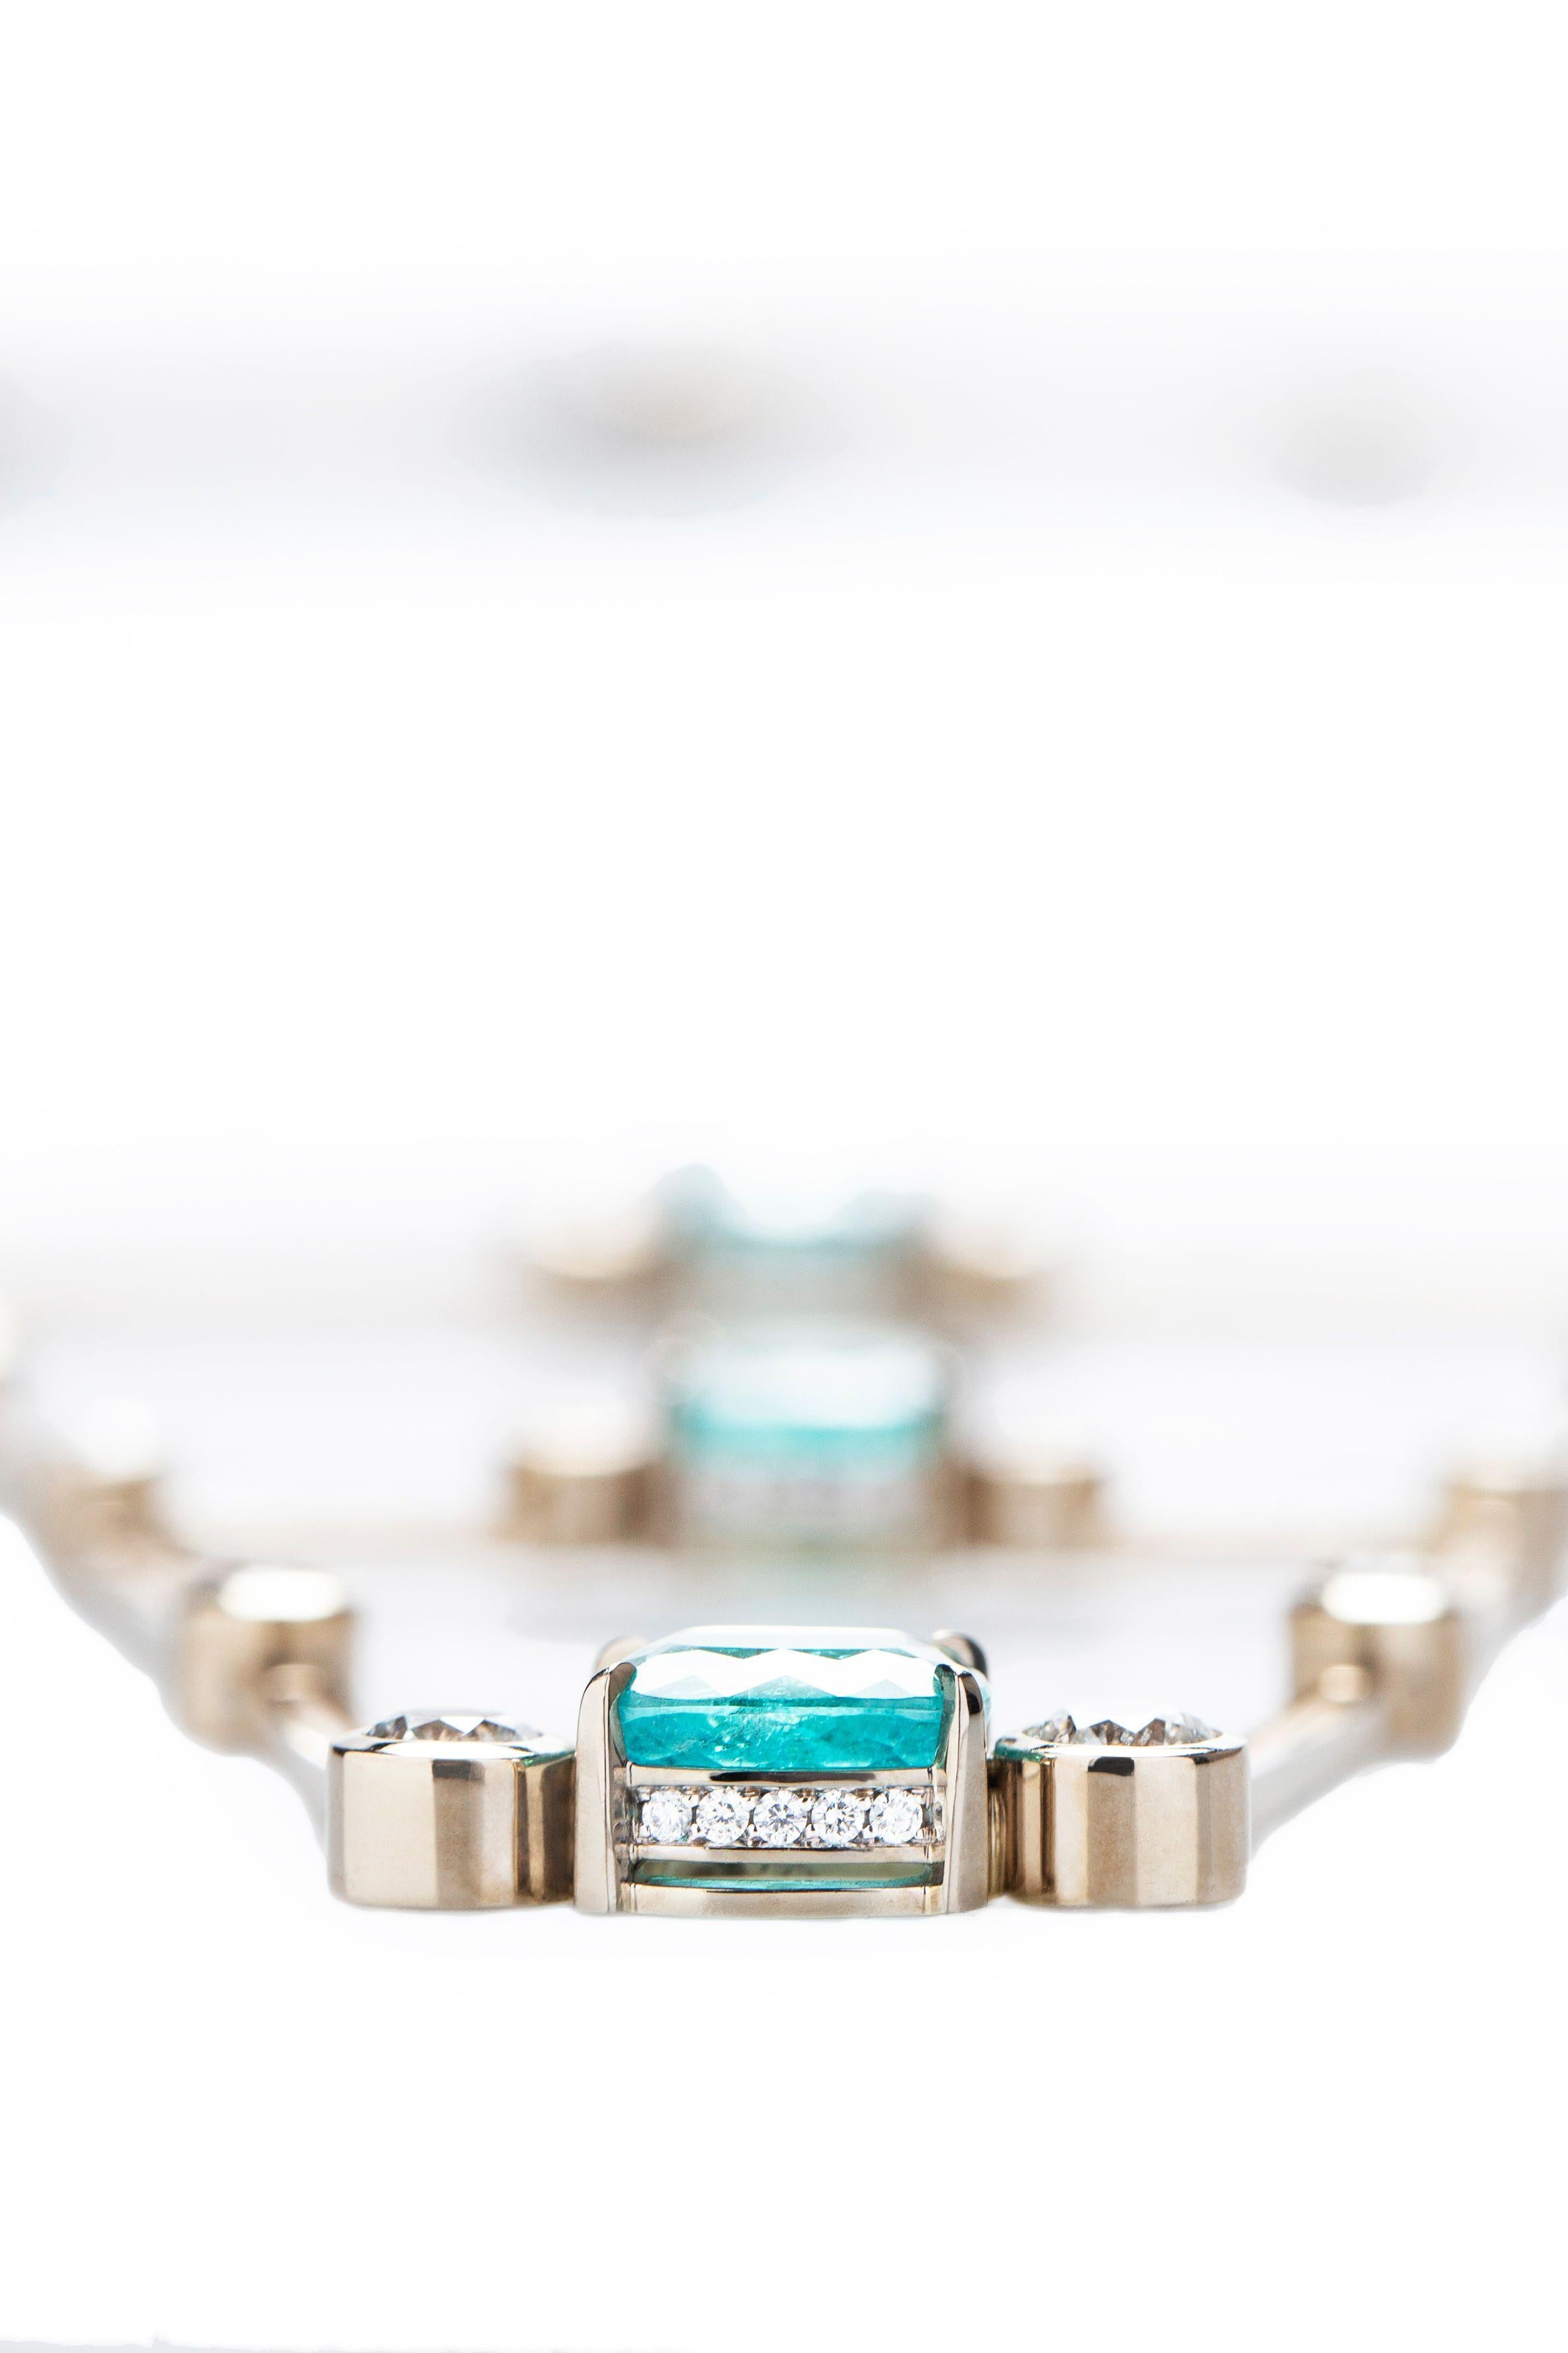 This Brazilian designed statement necklace has been exclusively designed by Ara Vartanian and was hand-crafted in his Sao Paulo Atelier. It features an 18K White Gold necklace enhanced with a Paraiba Tourmaline, weighing 12.89ct (twelve carats and